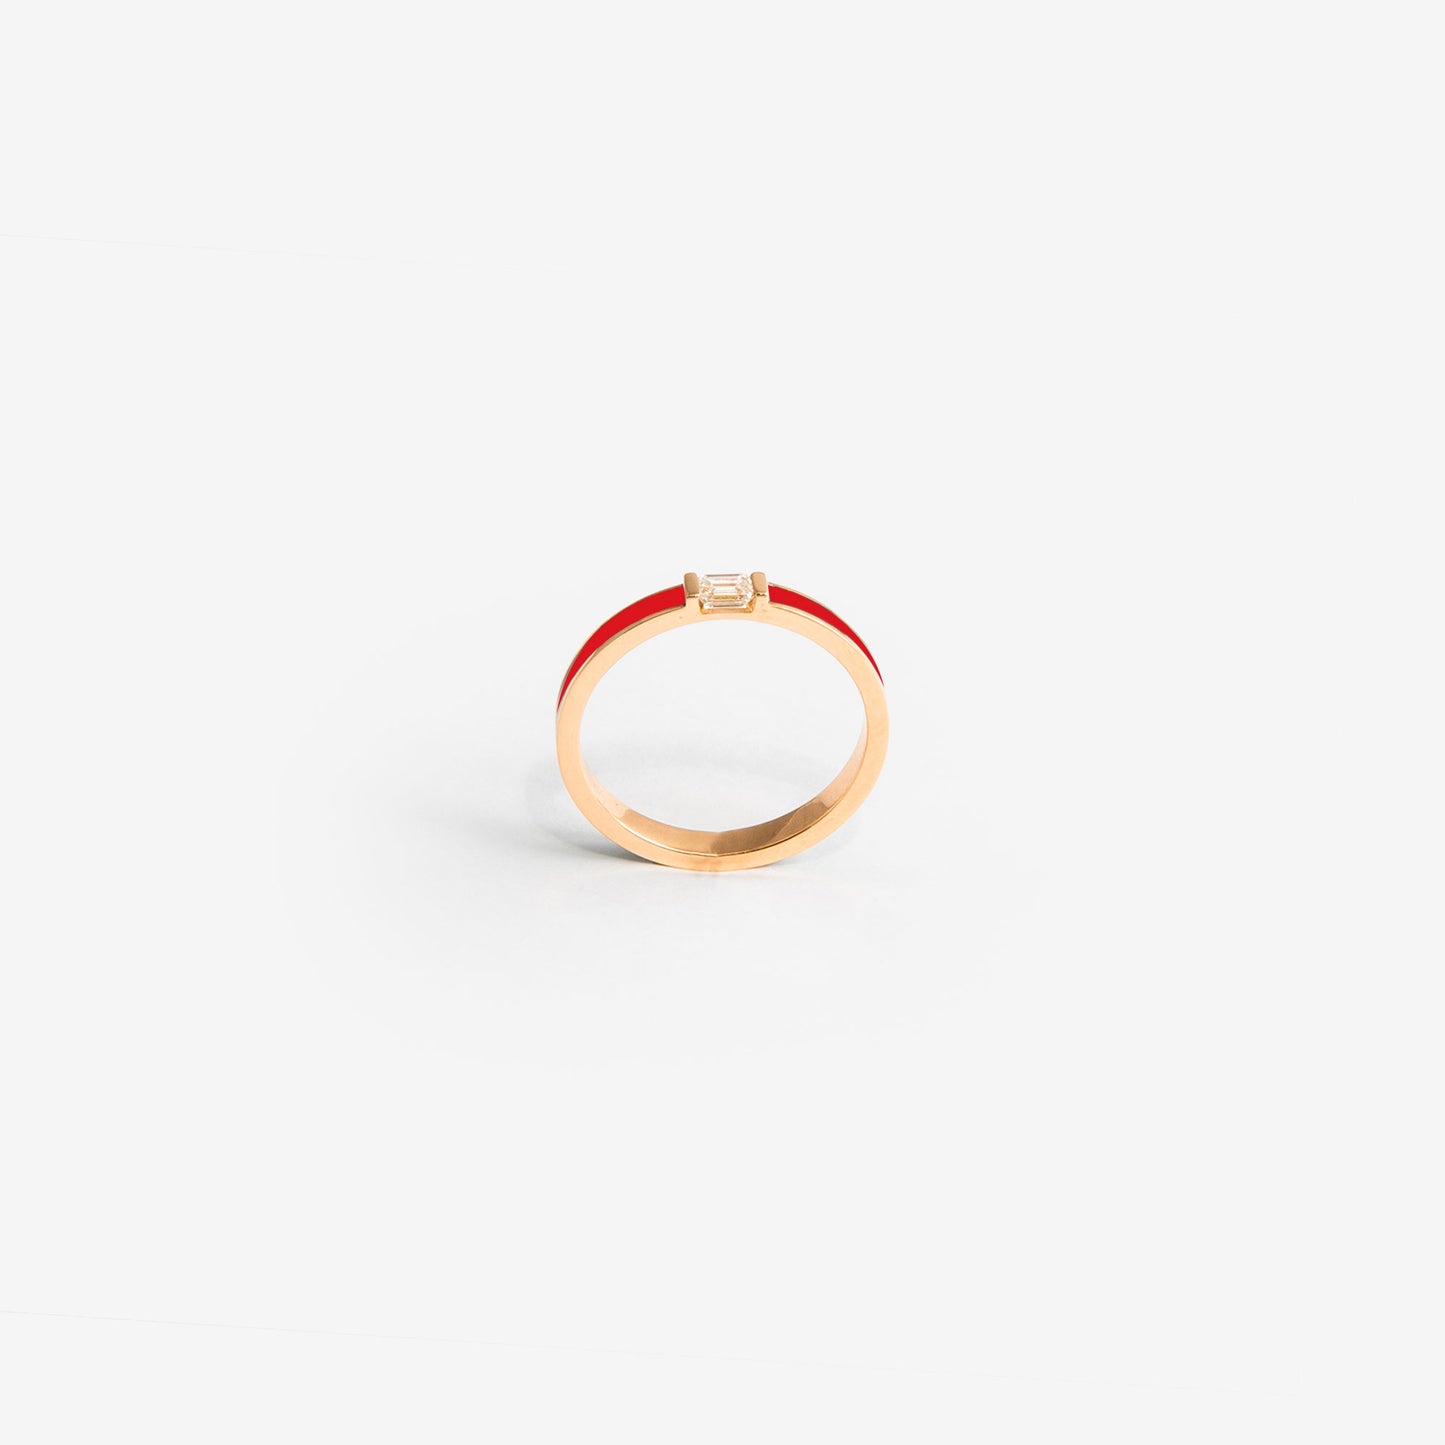 Rose gold band ring with red enamel and diamond